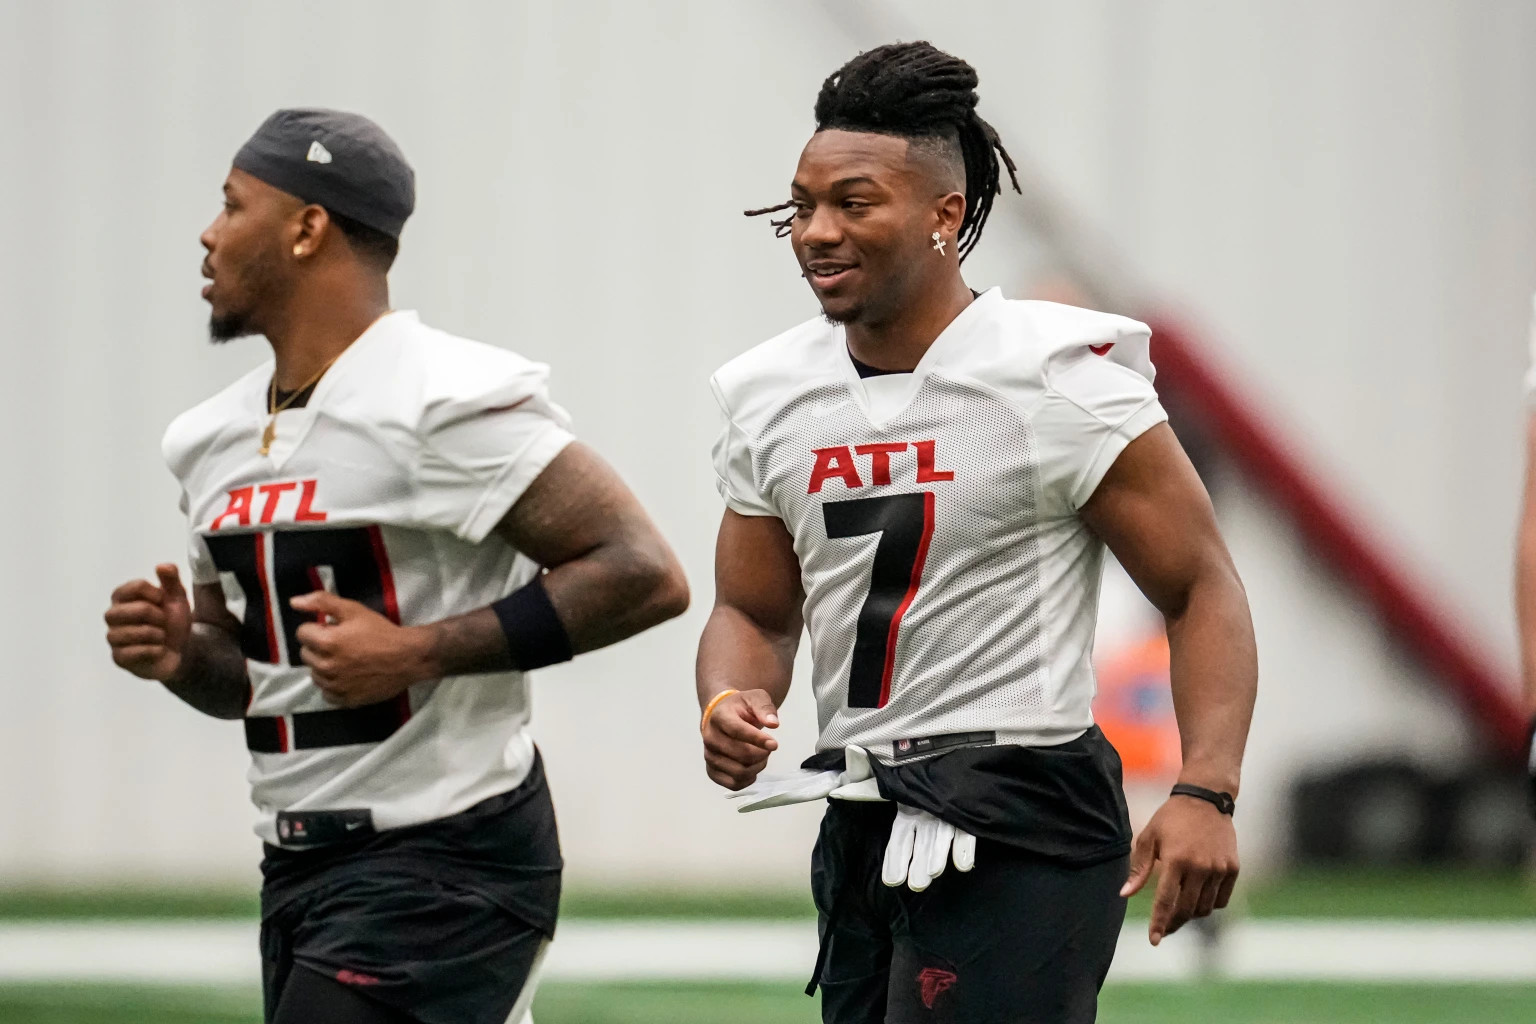 The Legacy of Number 7: Atlanta Falcons' History with #7